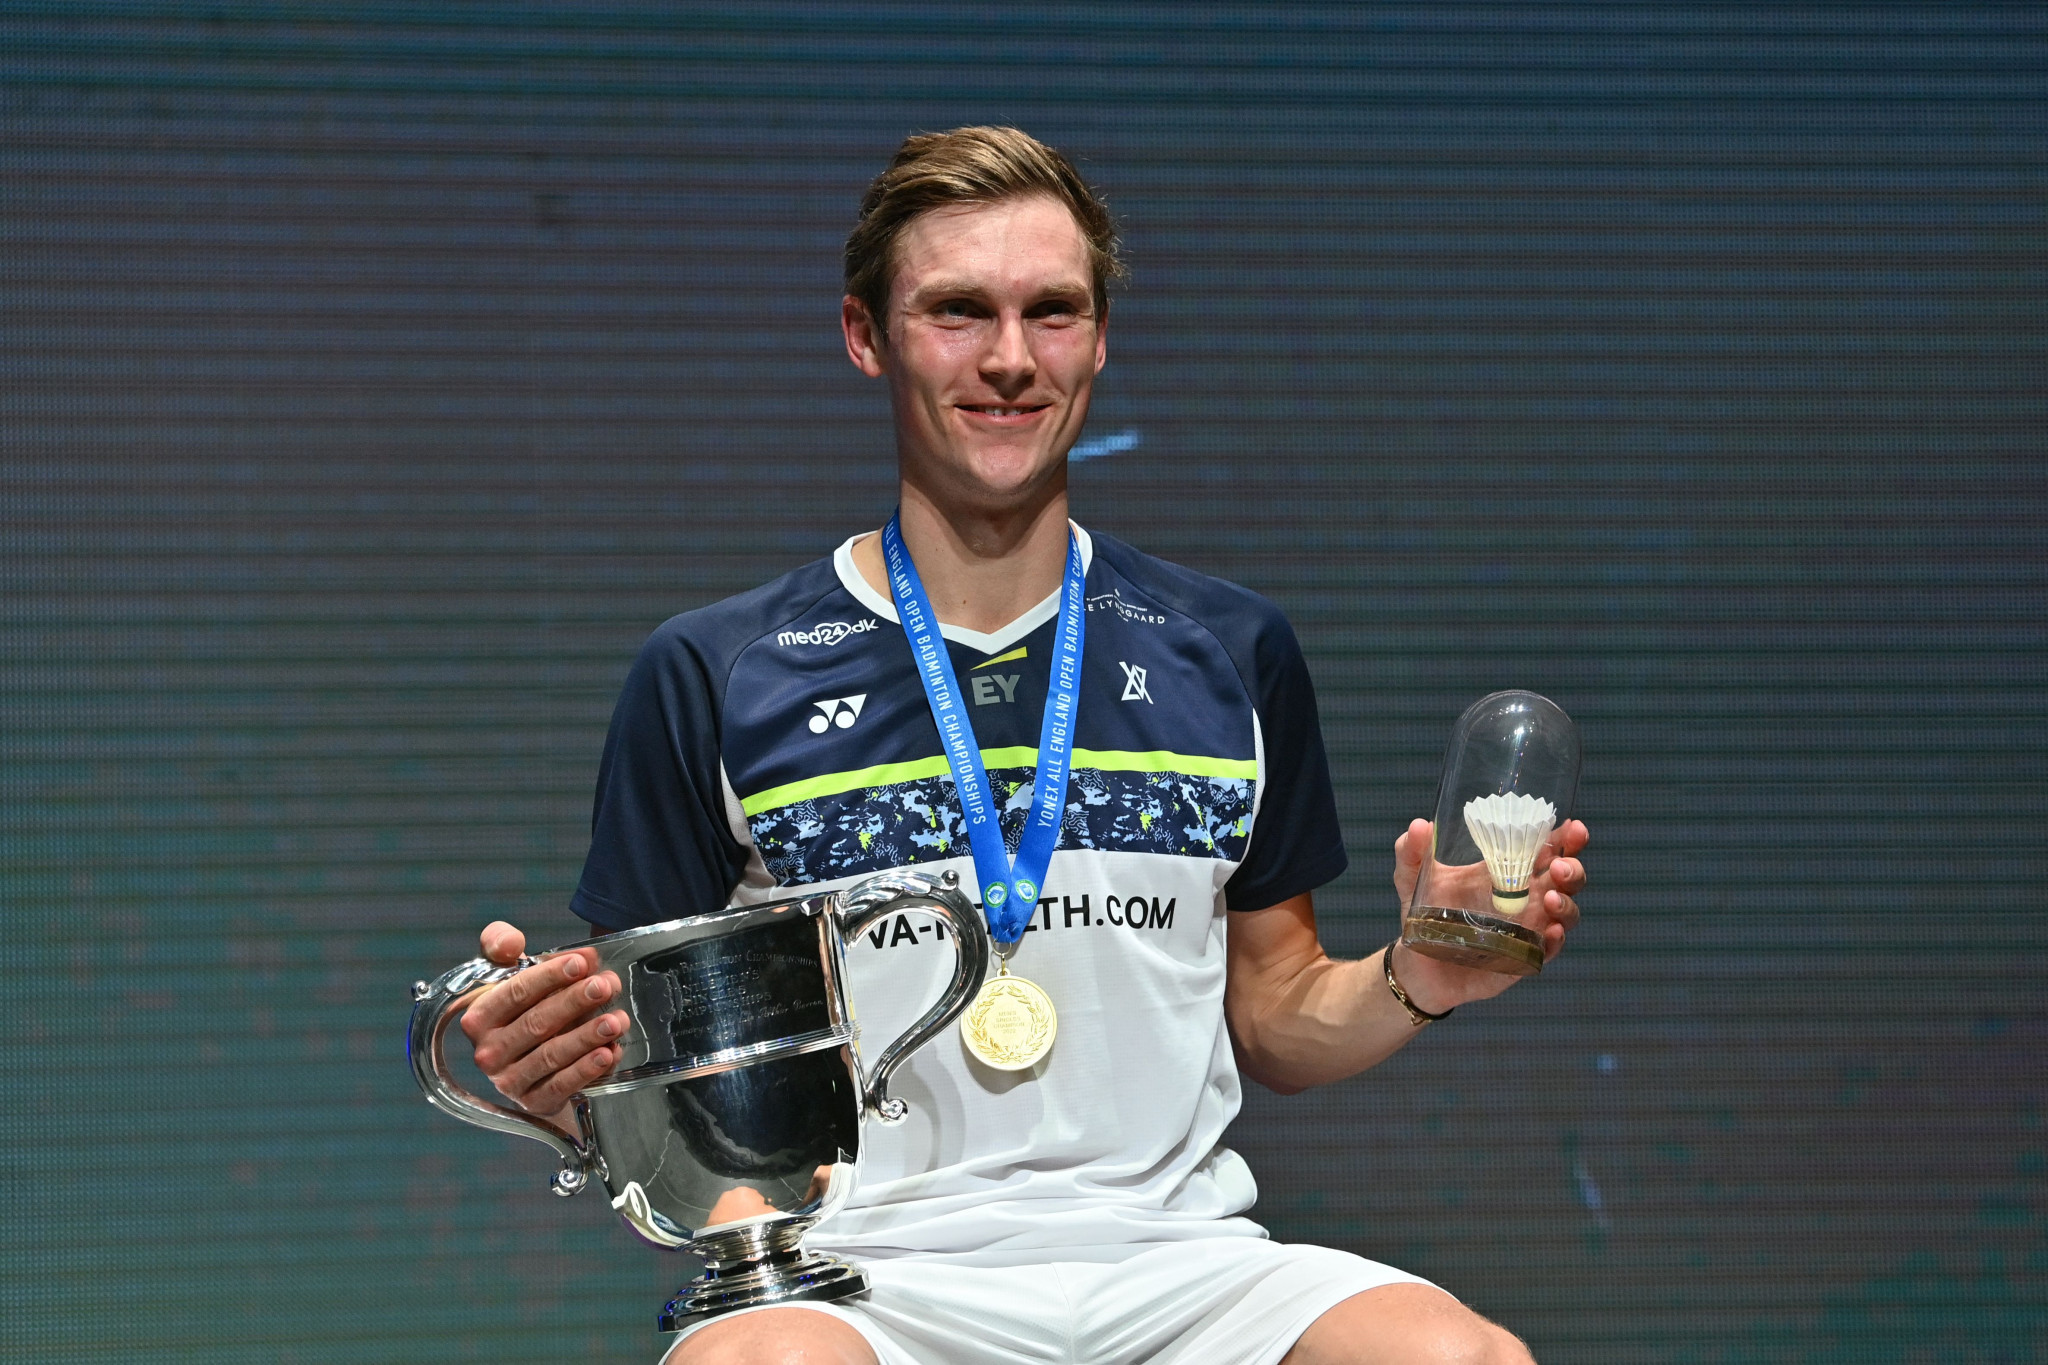 Axelsen claims second men's singles title at All England Open Badminton Championships